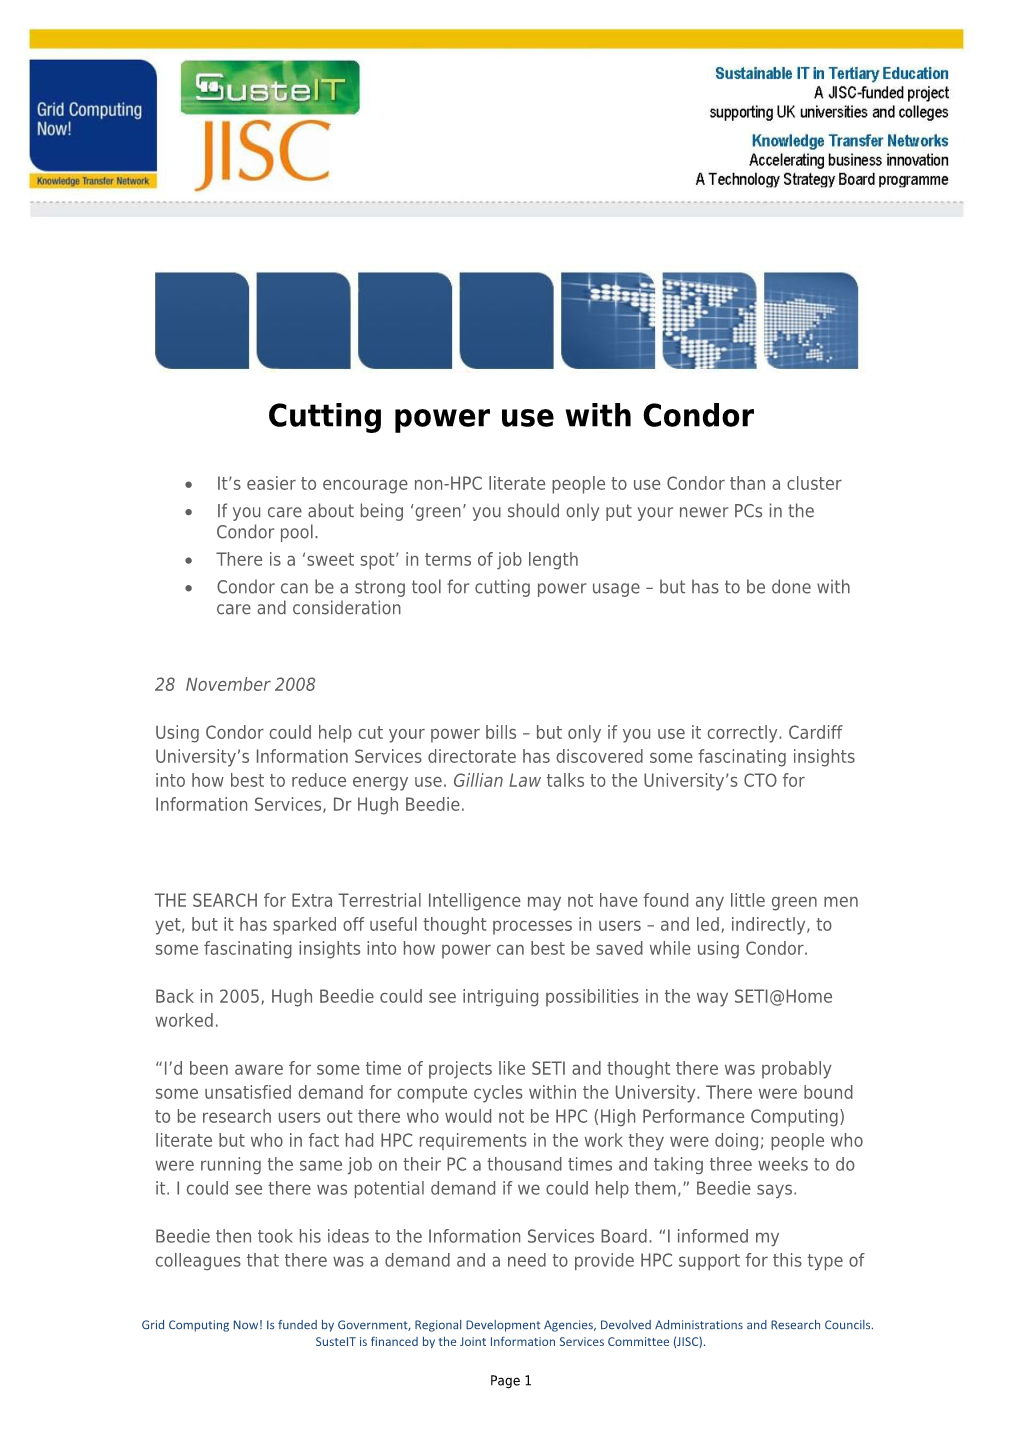 Cutting Power Use with Condor